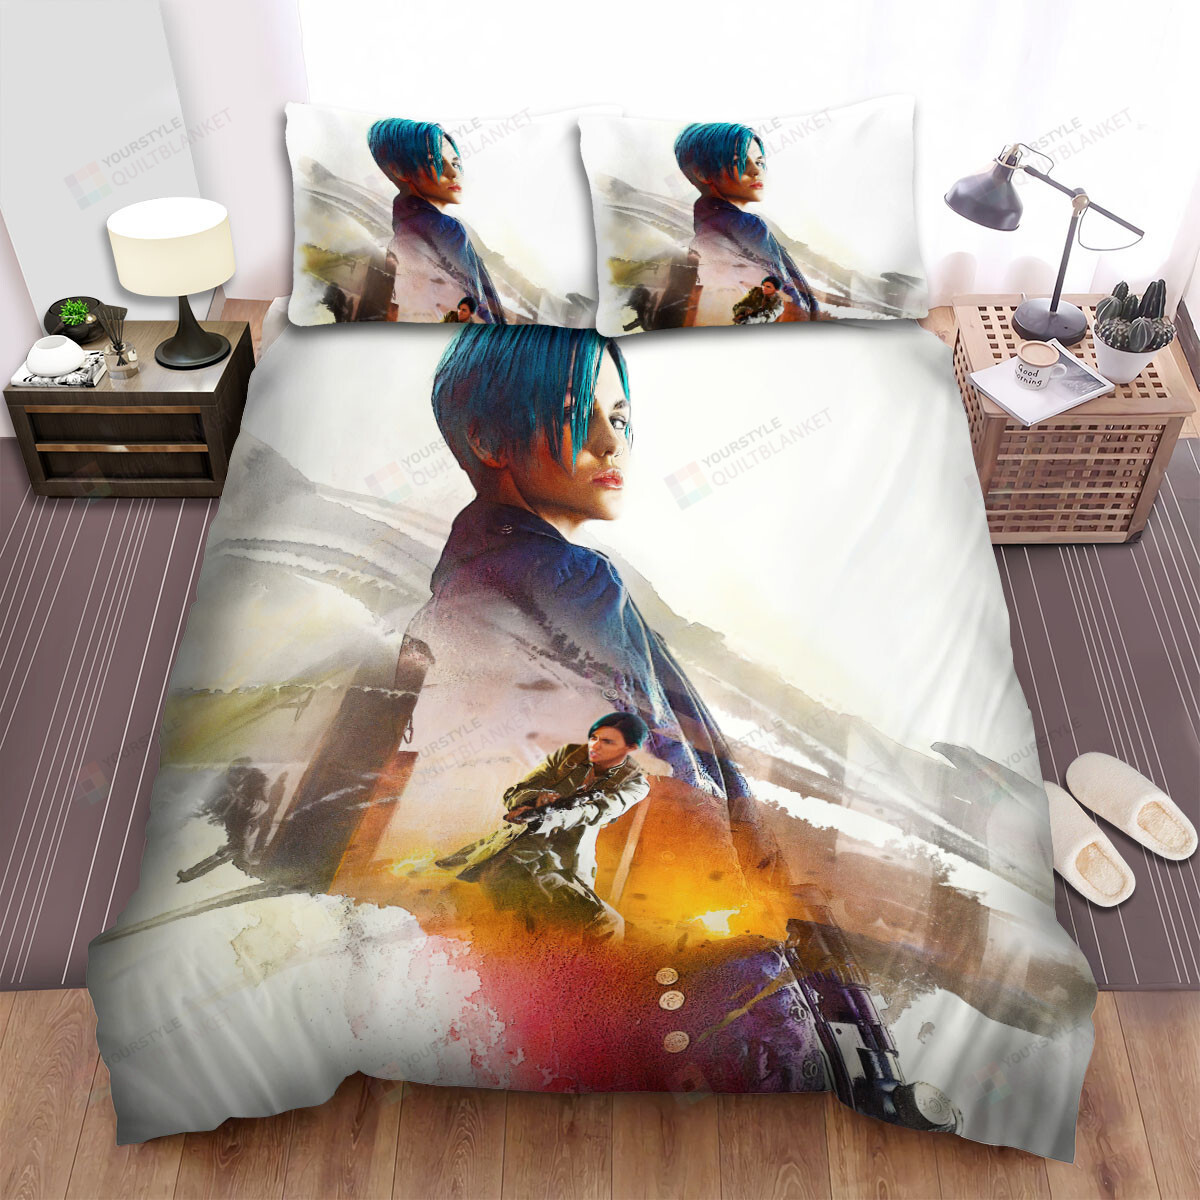 Xxx Return Of Xander Cage Ruby Rose Is Adele Wolff Poster Bed Sheets Duvet Cover Bedding Sets